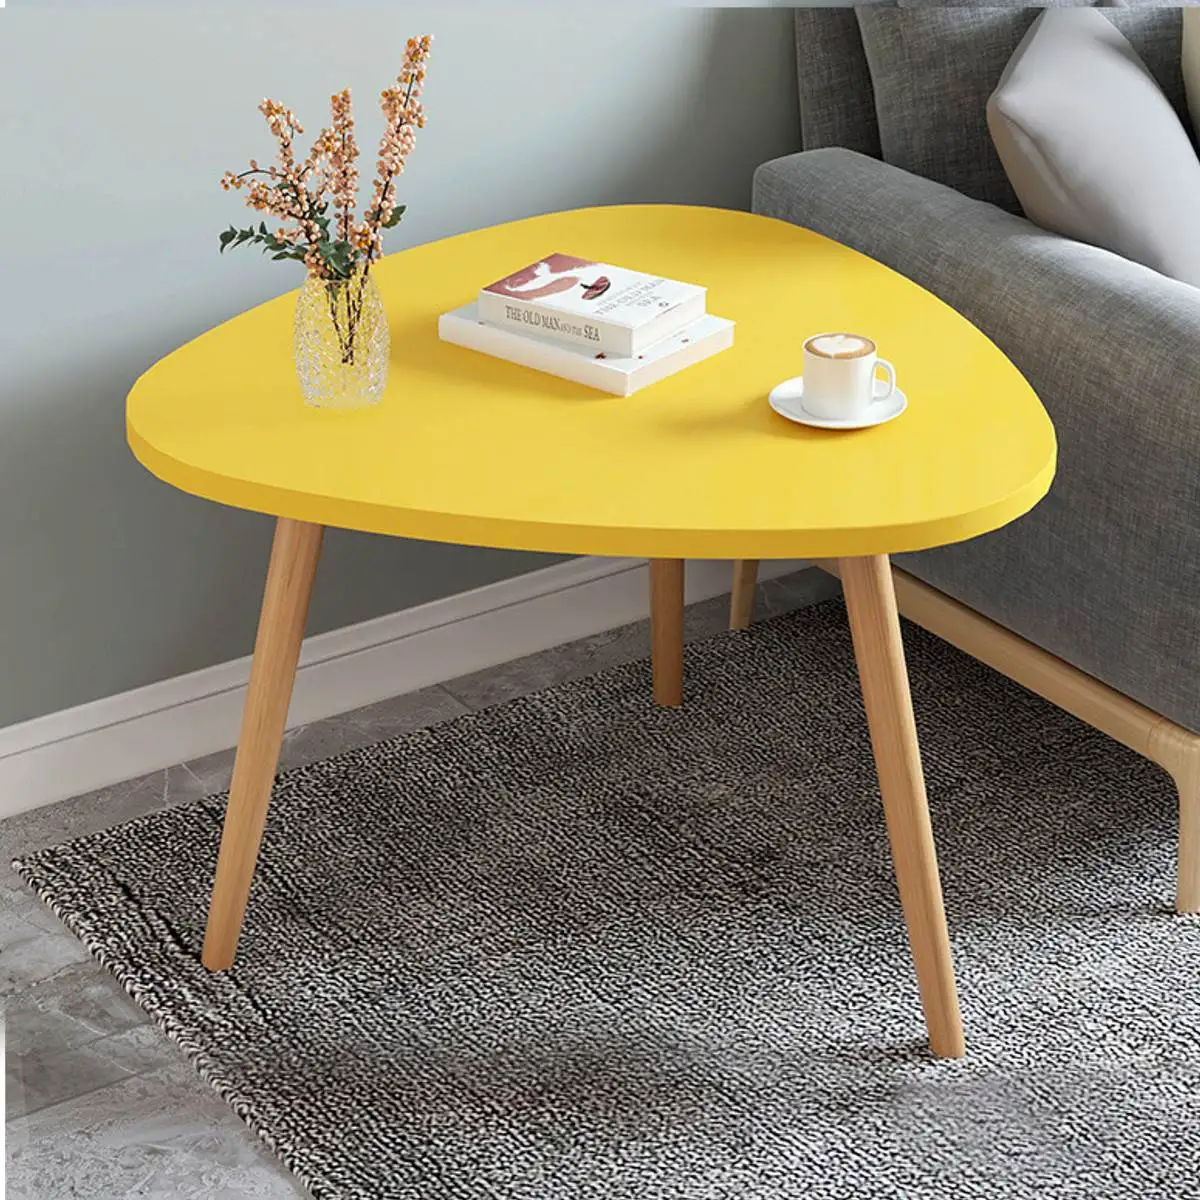 

Creative Nordic Wood Low Round Coffee Table Dirty Storage Table Tea Fruit Snack Service Plate Tray Living Room Sofa Side Table